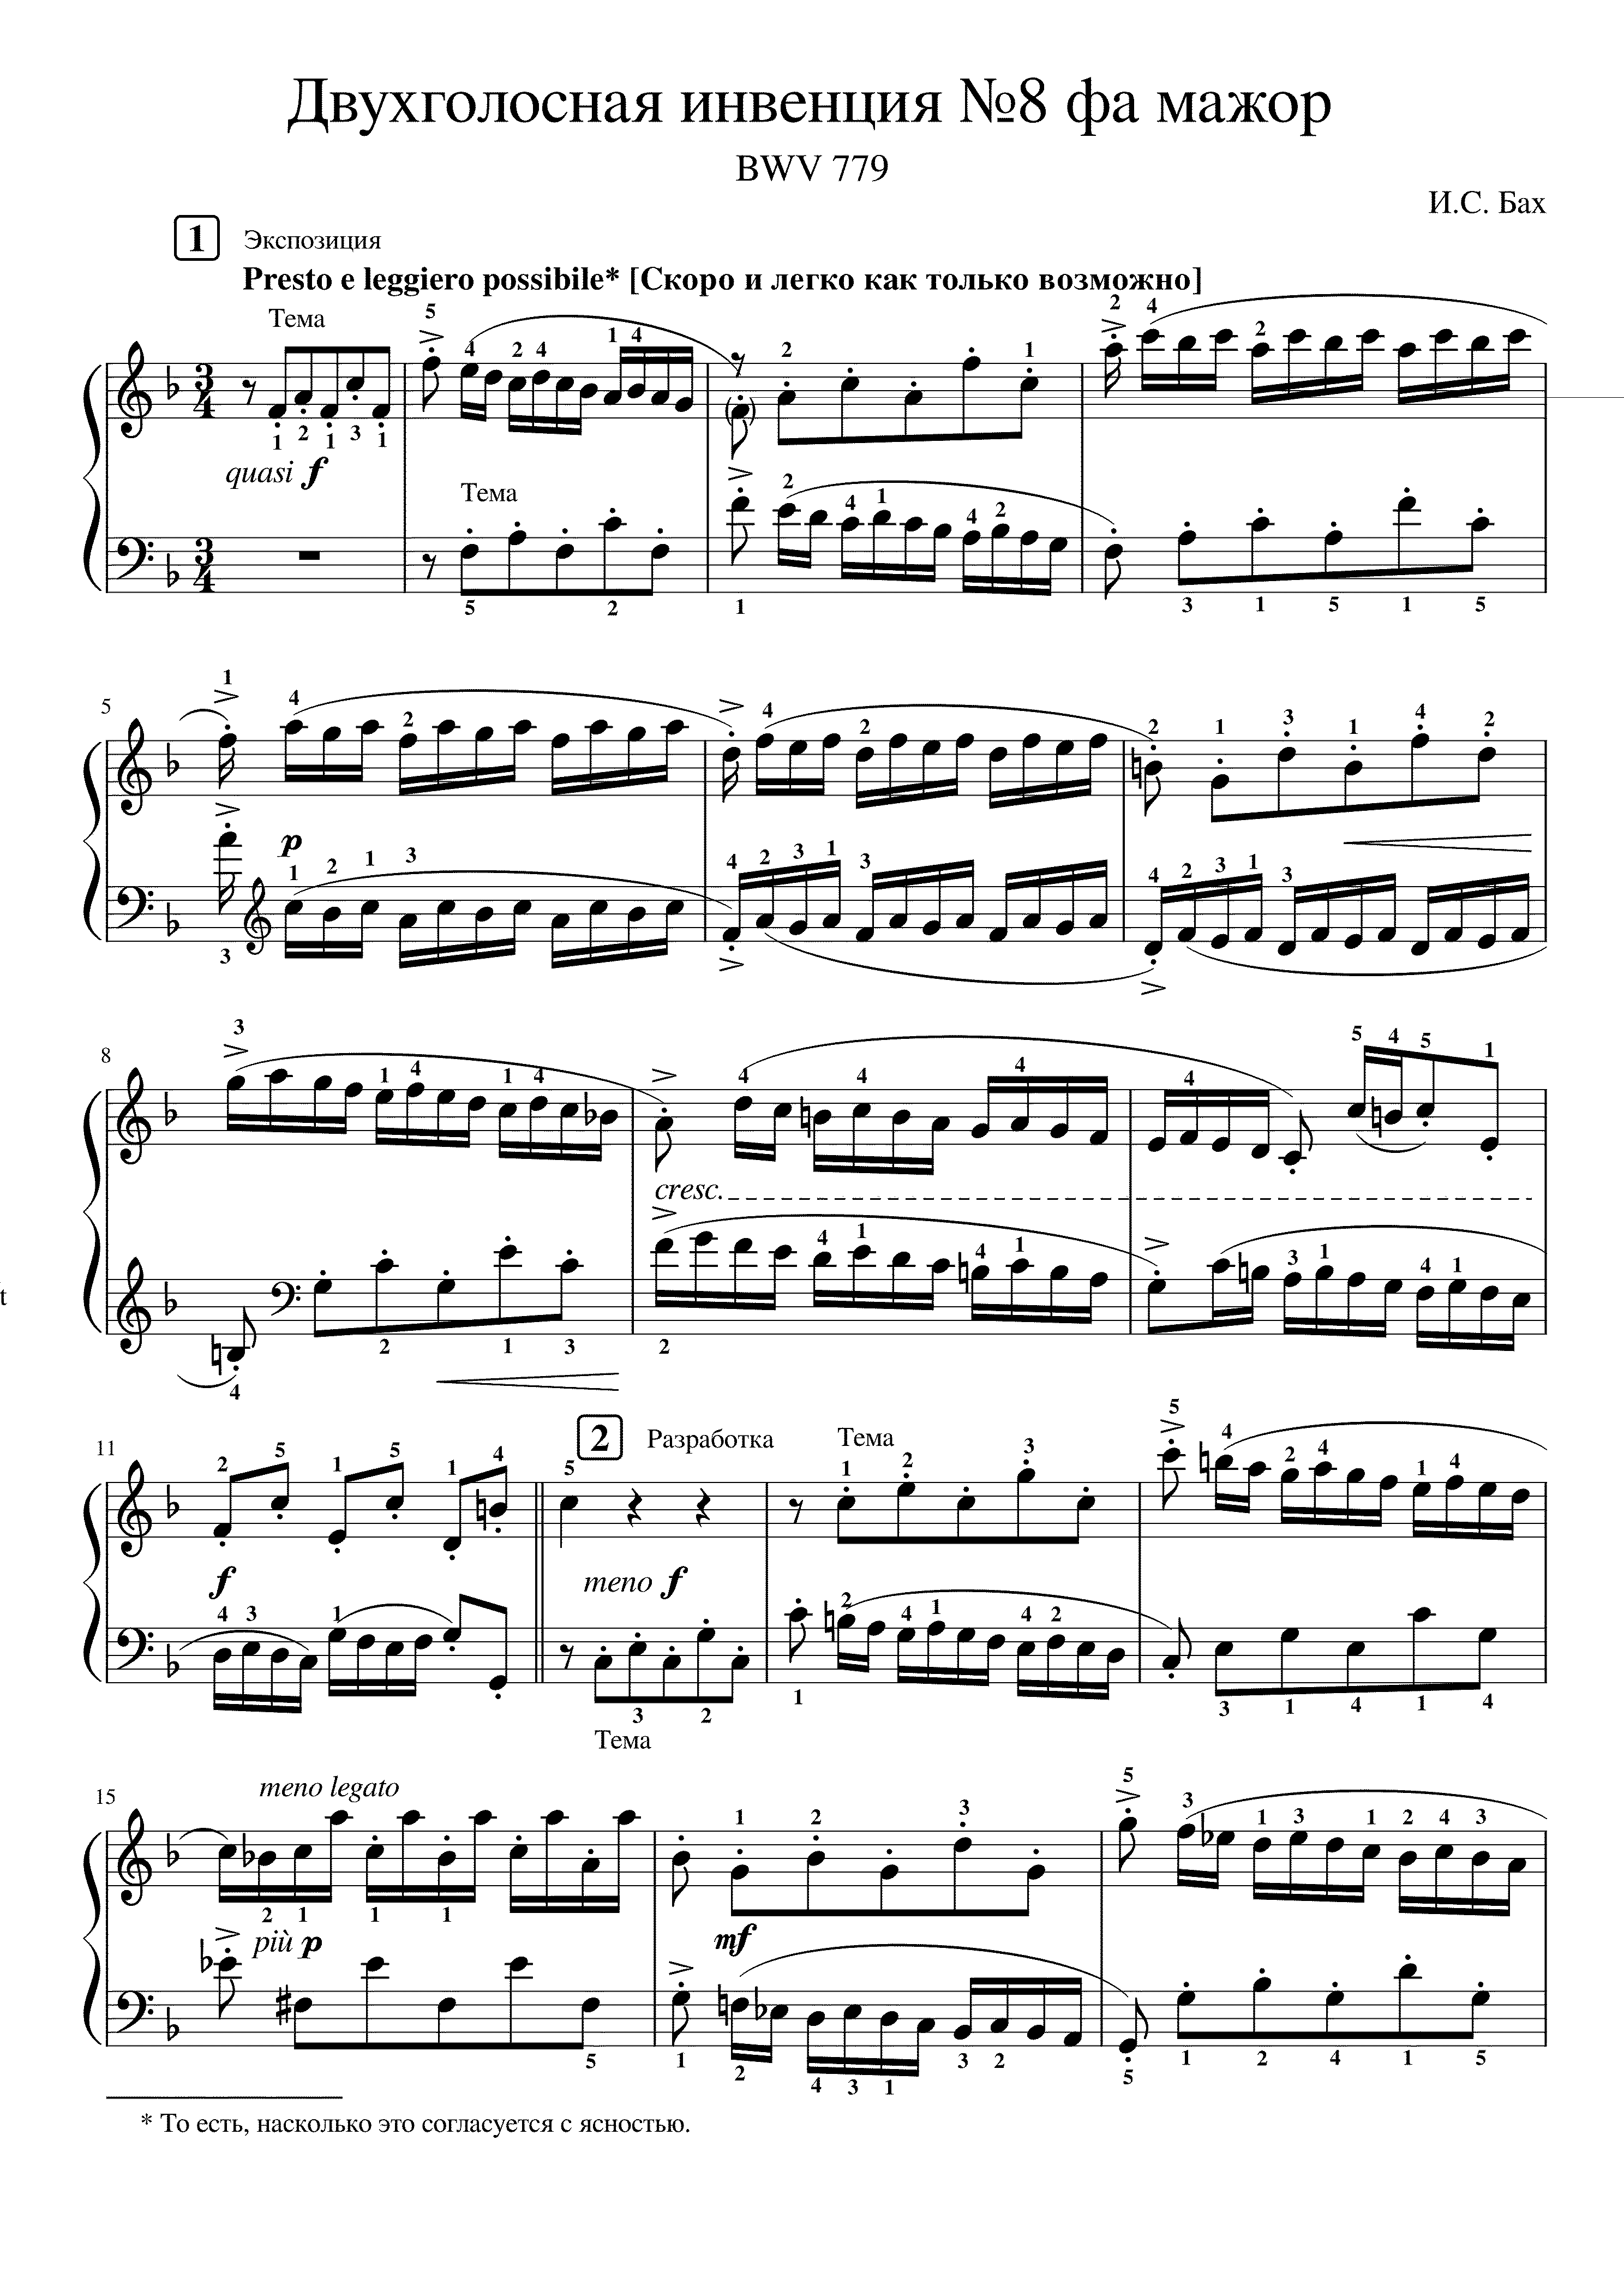 Partitura Invention 8 Bach